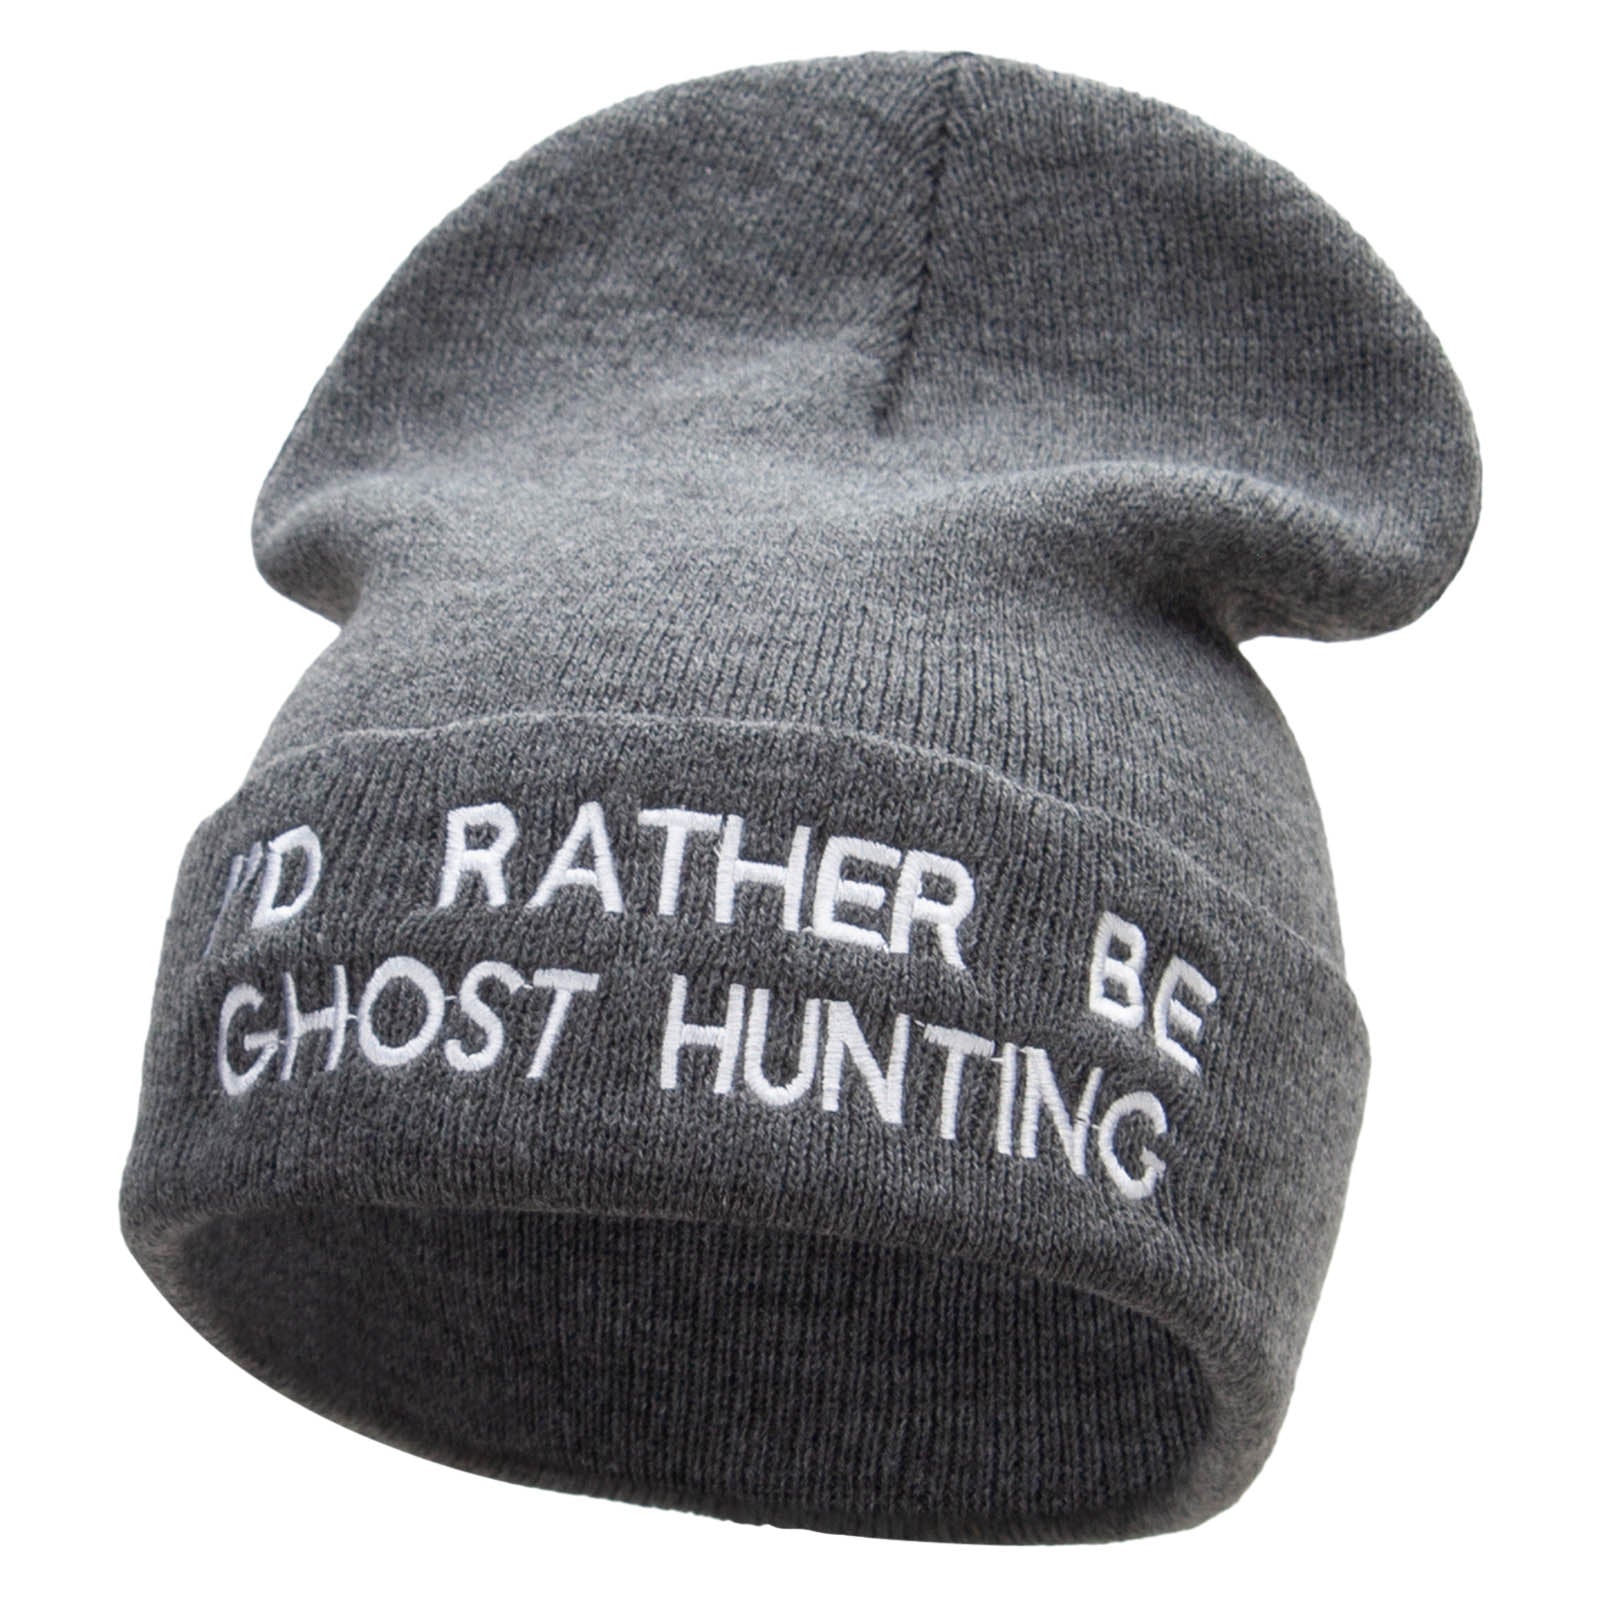 I&#039;d Rather Be Ghost Hunting Long Beanie - Heather Charcoal OSFM